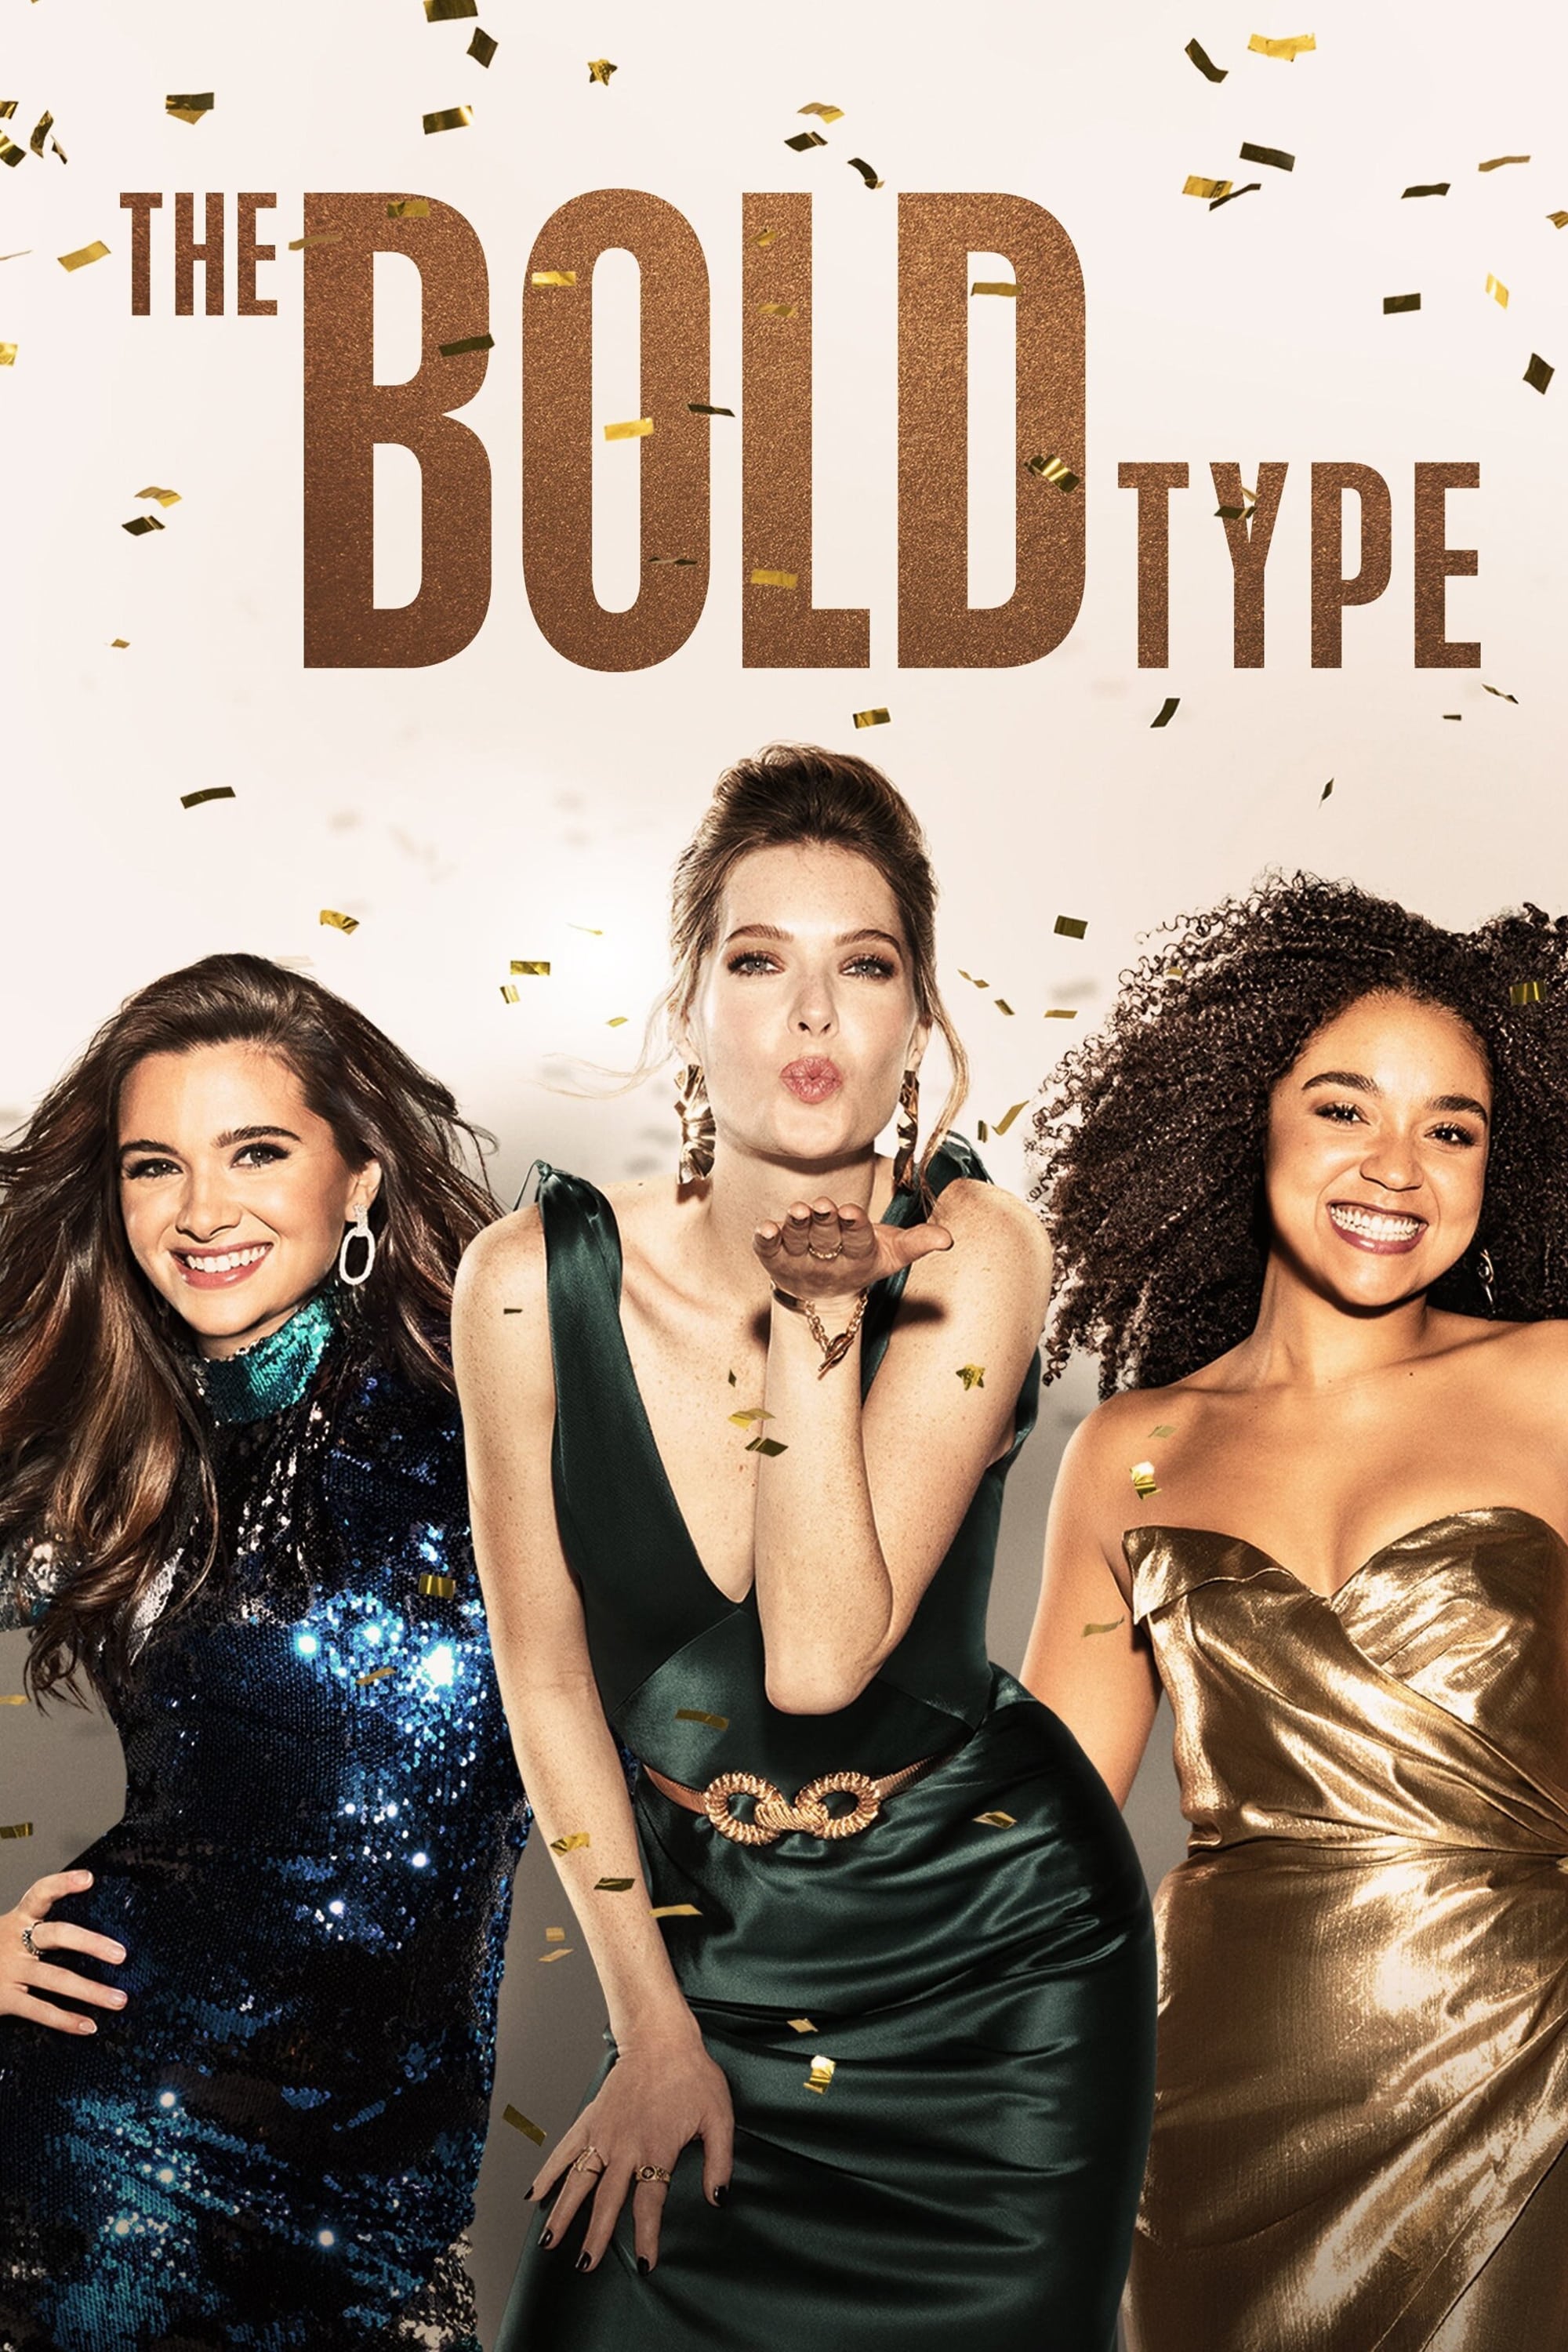 The Bold Type (2017)